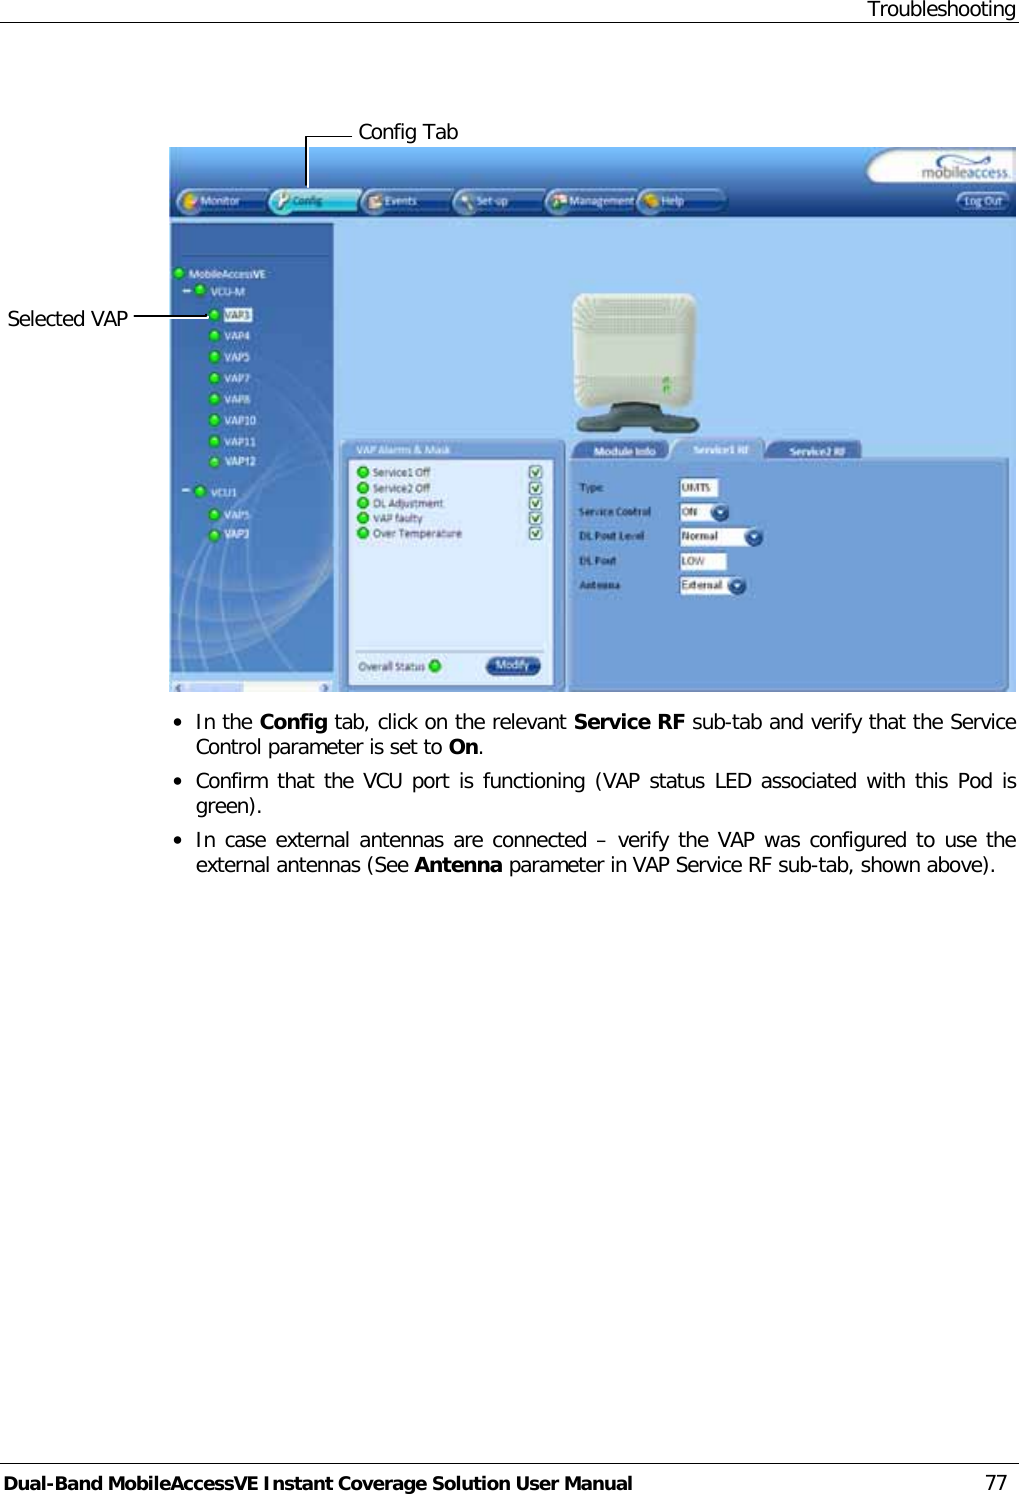 Troubleshooting Dual-Band MobileAccessVE Instant Coverage Solution User Manual 77    · In the Config tab, click on the relevant Service RF sub-tab and verify that the Service Control parameter is set to On. · Confirm that the VCU port is functioning (VAP status LED associated with this Pod is green). · In case external antennas are connected – verify the VAP was configured to use the external antennas (See Antenna parameter in VAP Service RF sub-tab, shown above).  Selected VAP Config Tab 